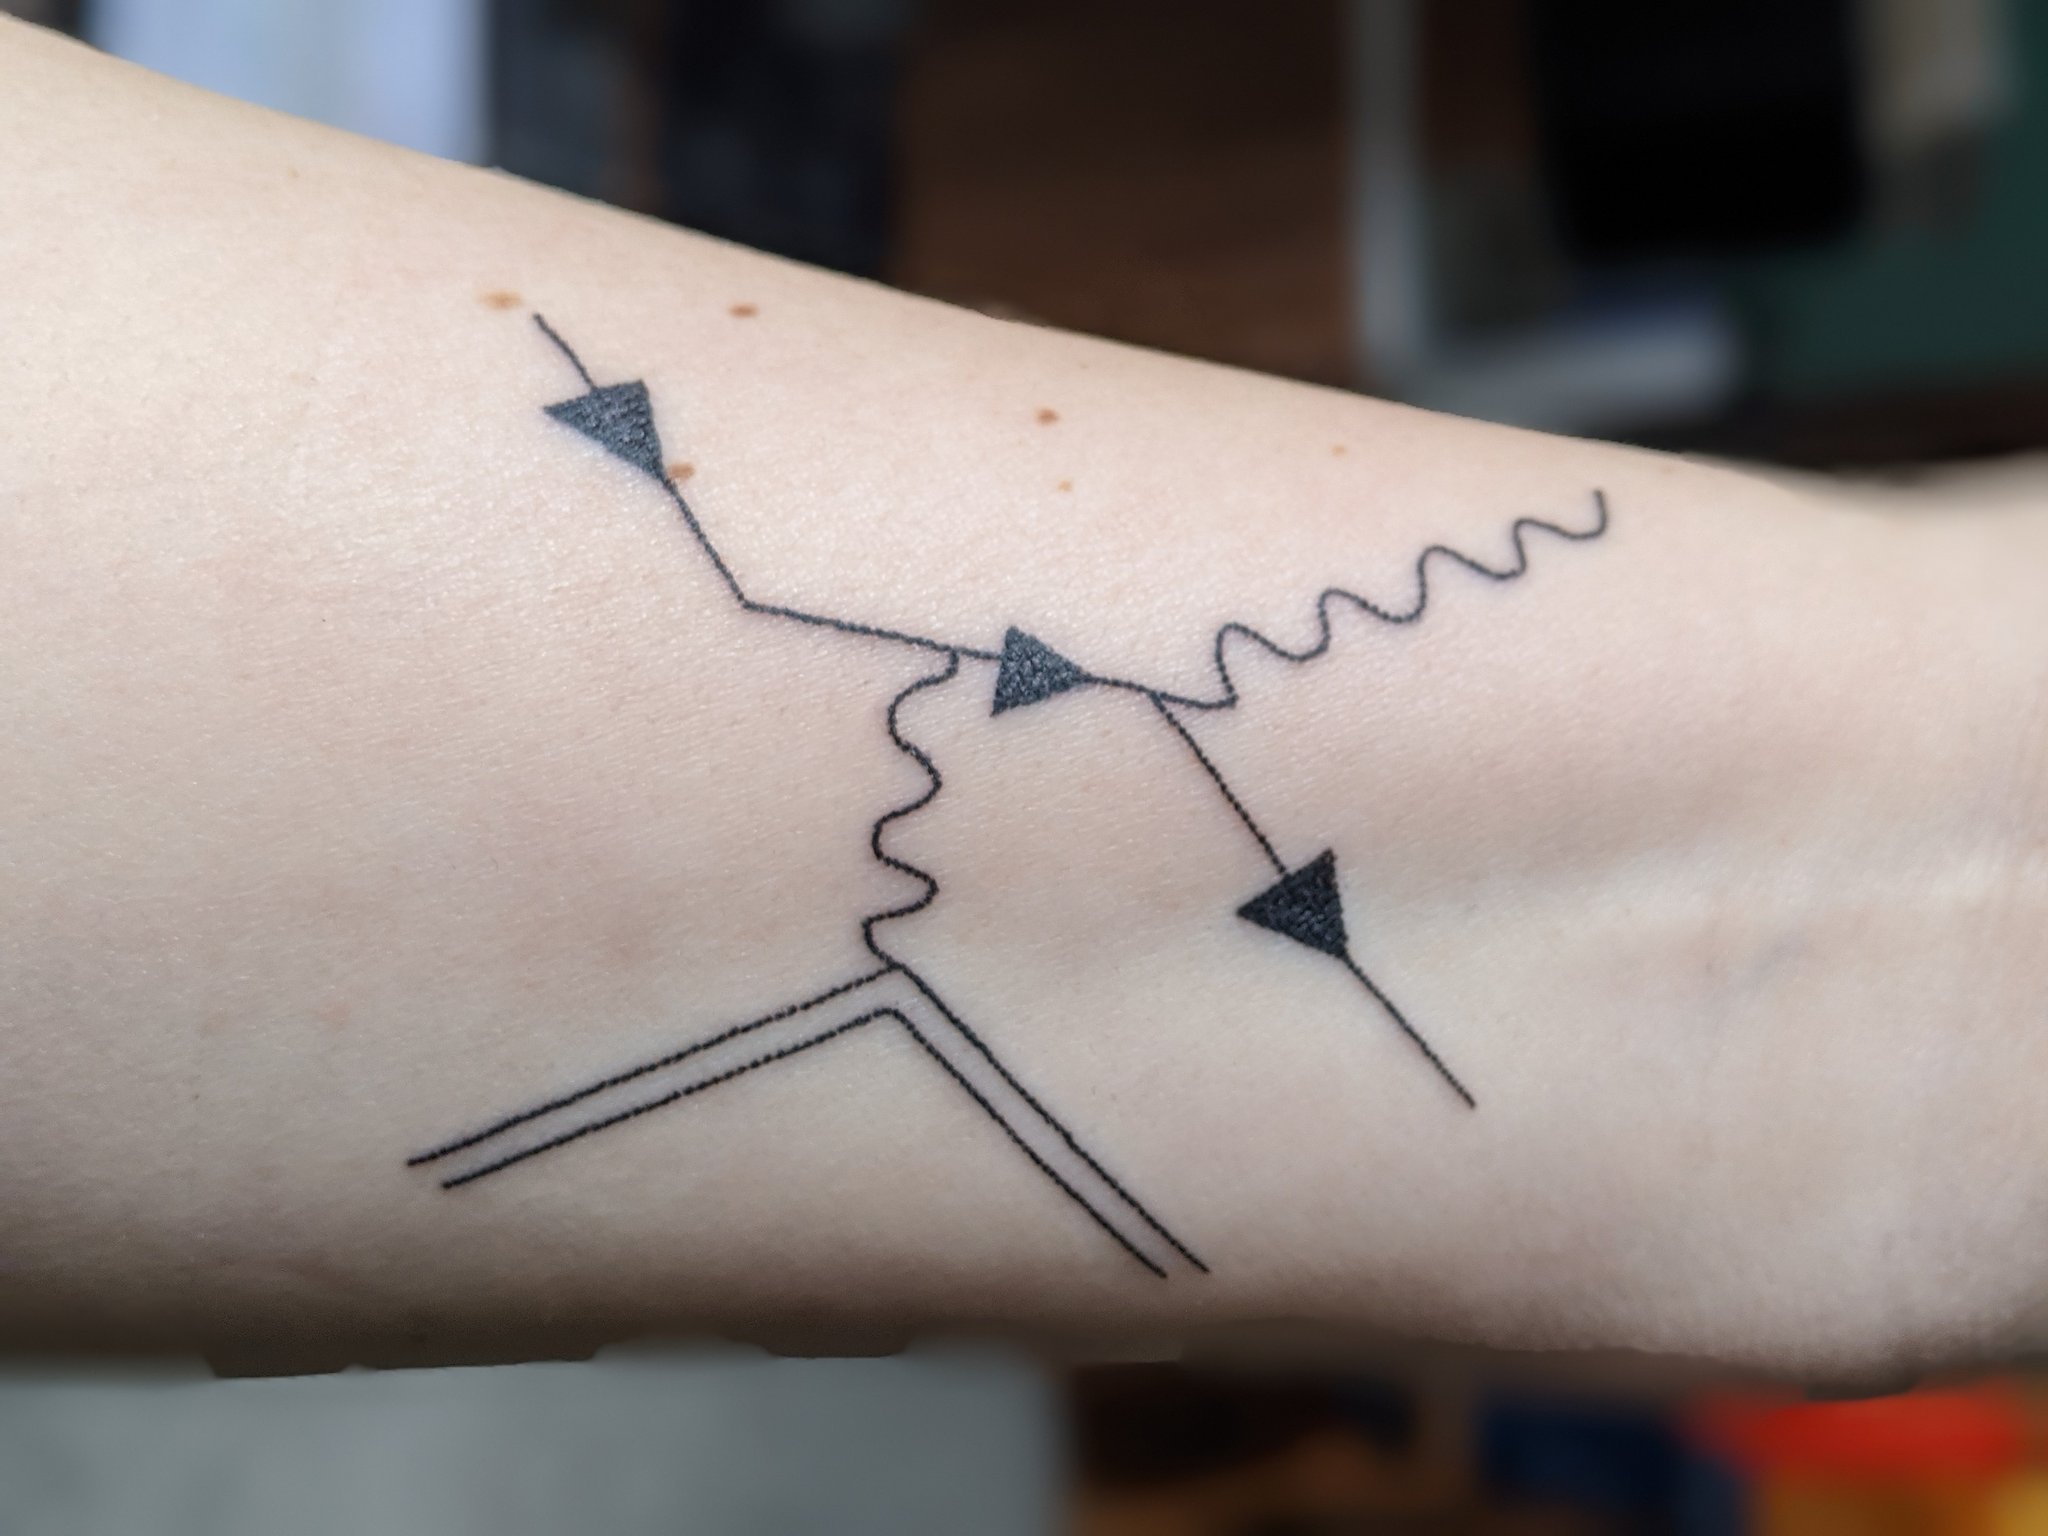 Tattoo tagged with: Inner arm, constellation, hand poked, aquarius  contellation, sagittarius constellation, annpokes, stick and poke |  inked-app.com